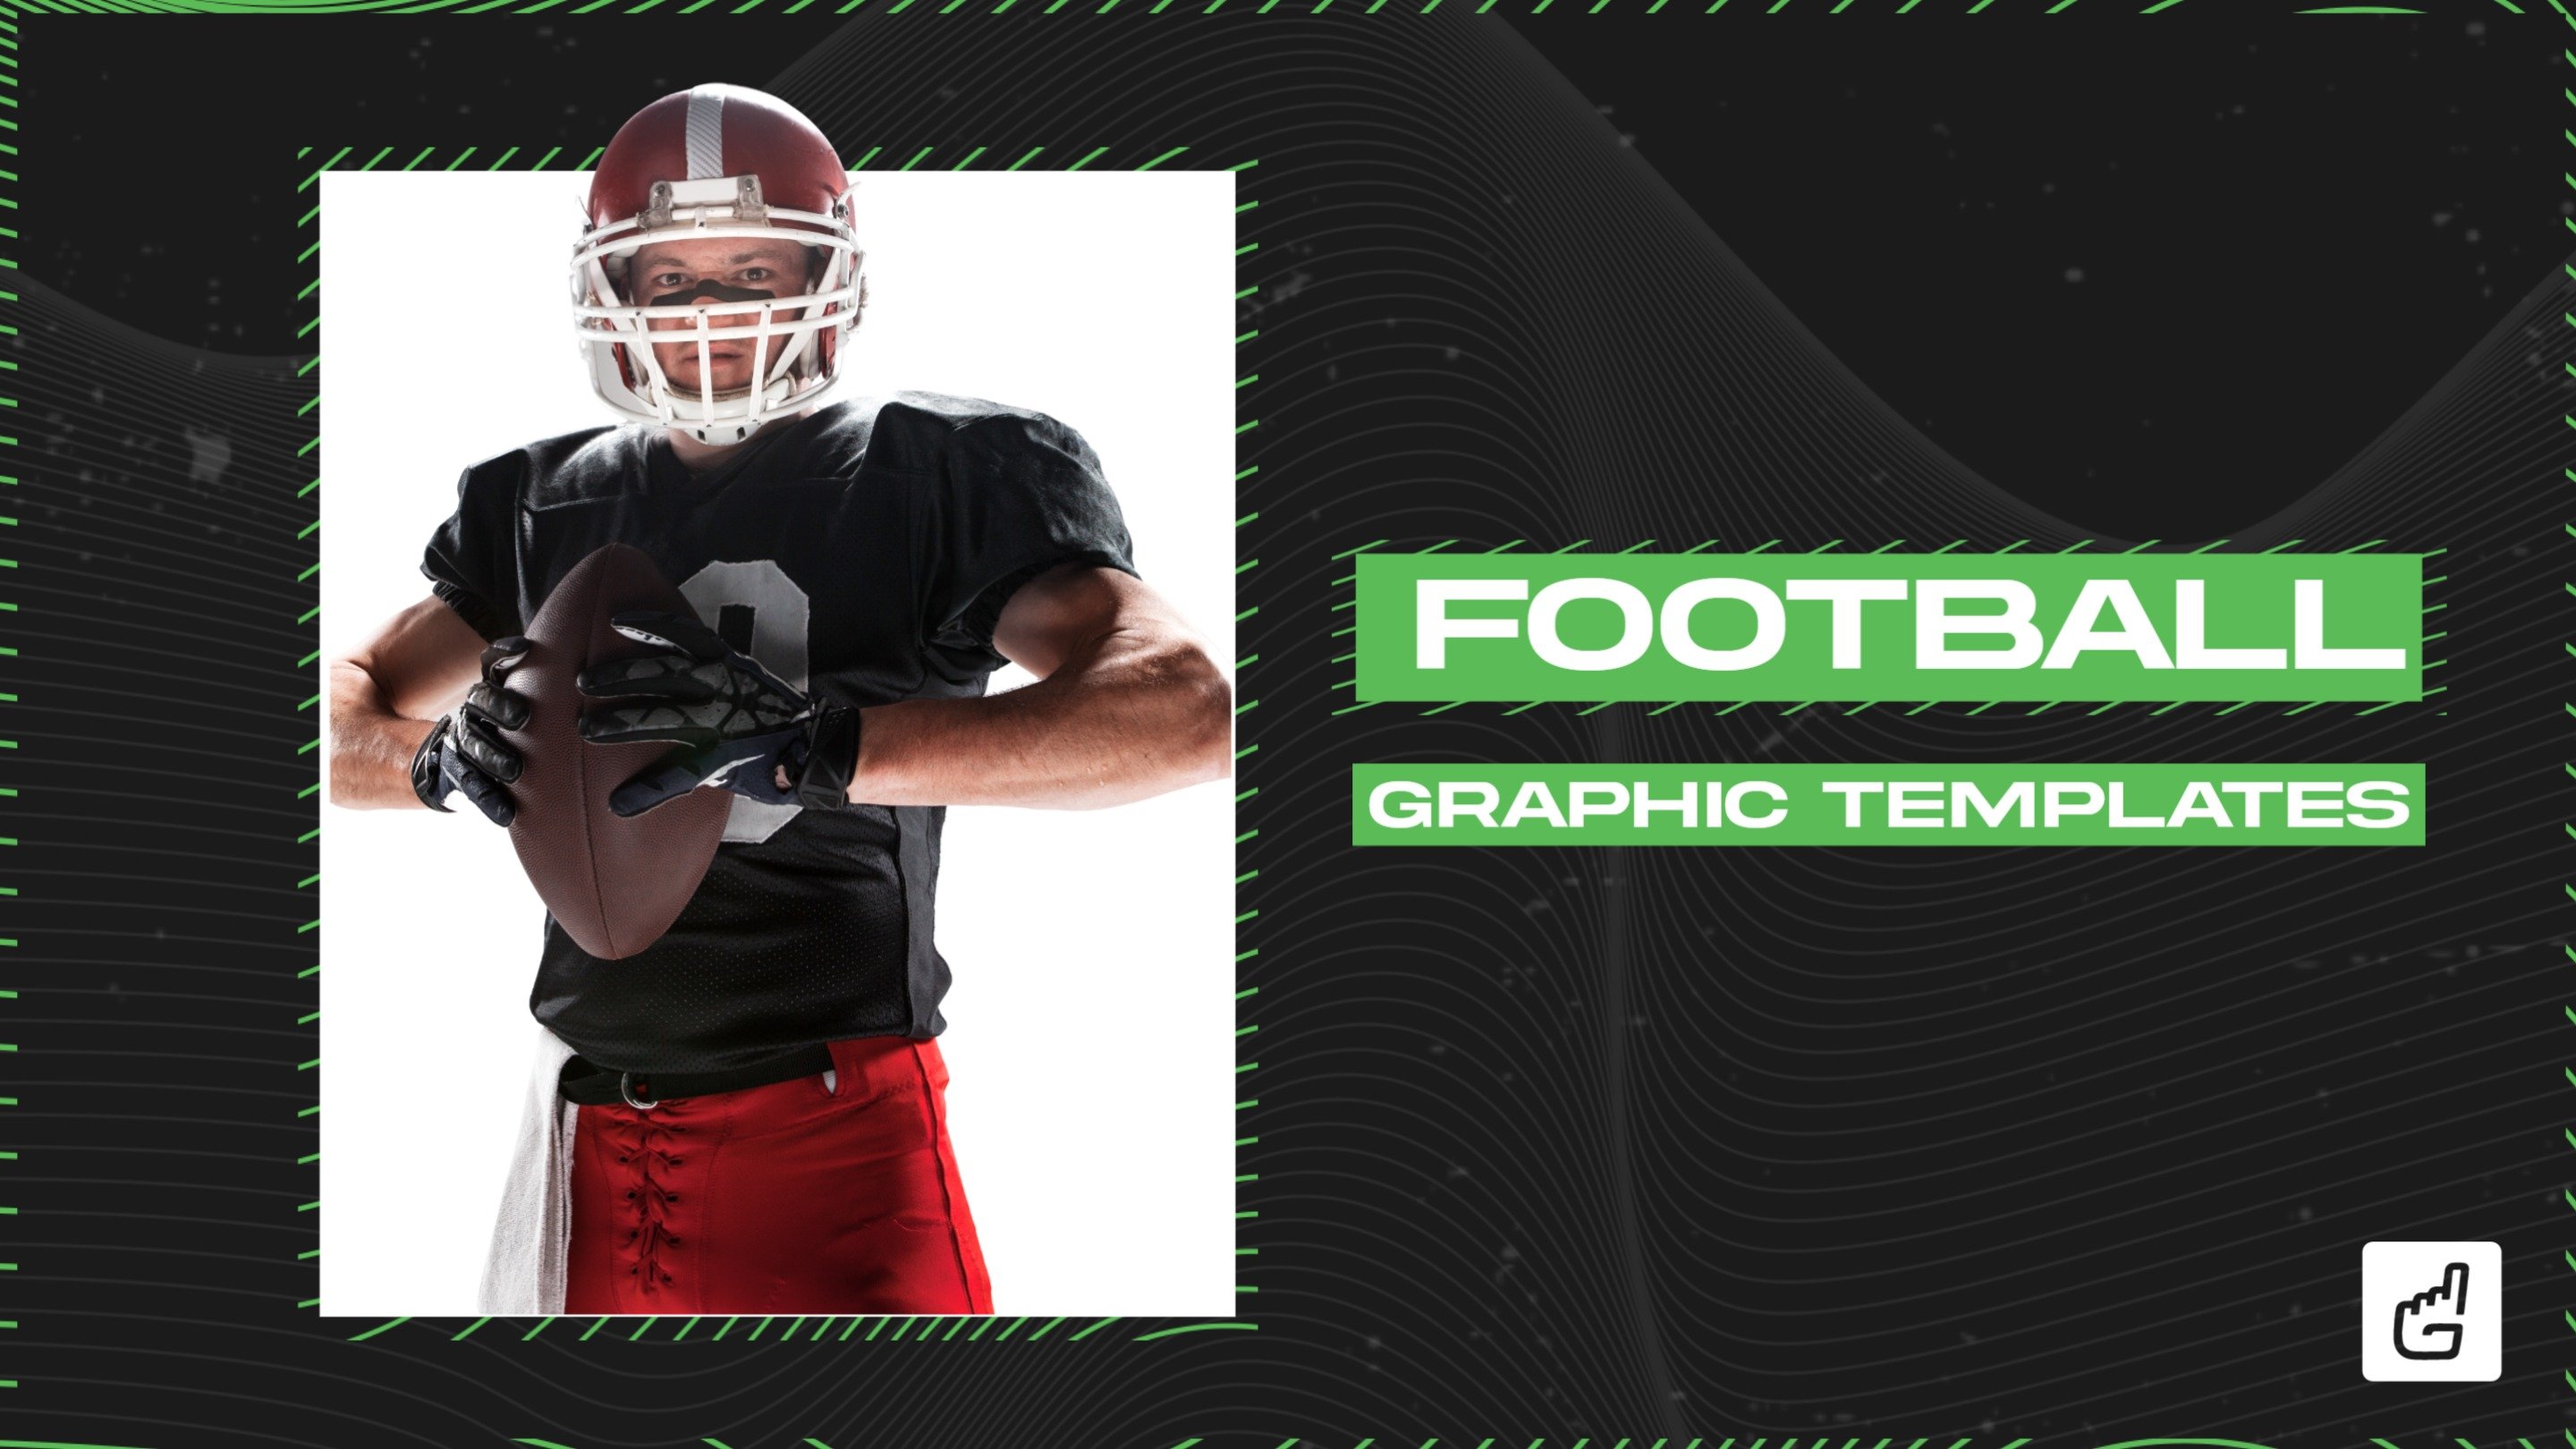 Sport Jersey designs, themes, templates and downloadable graphic